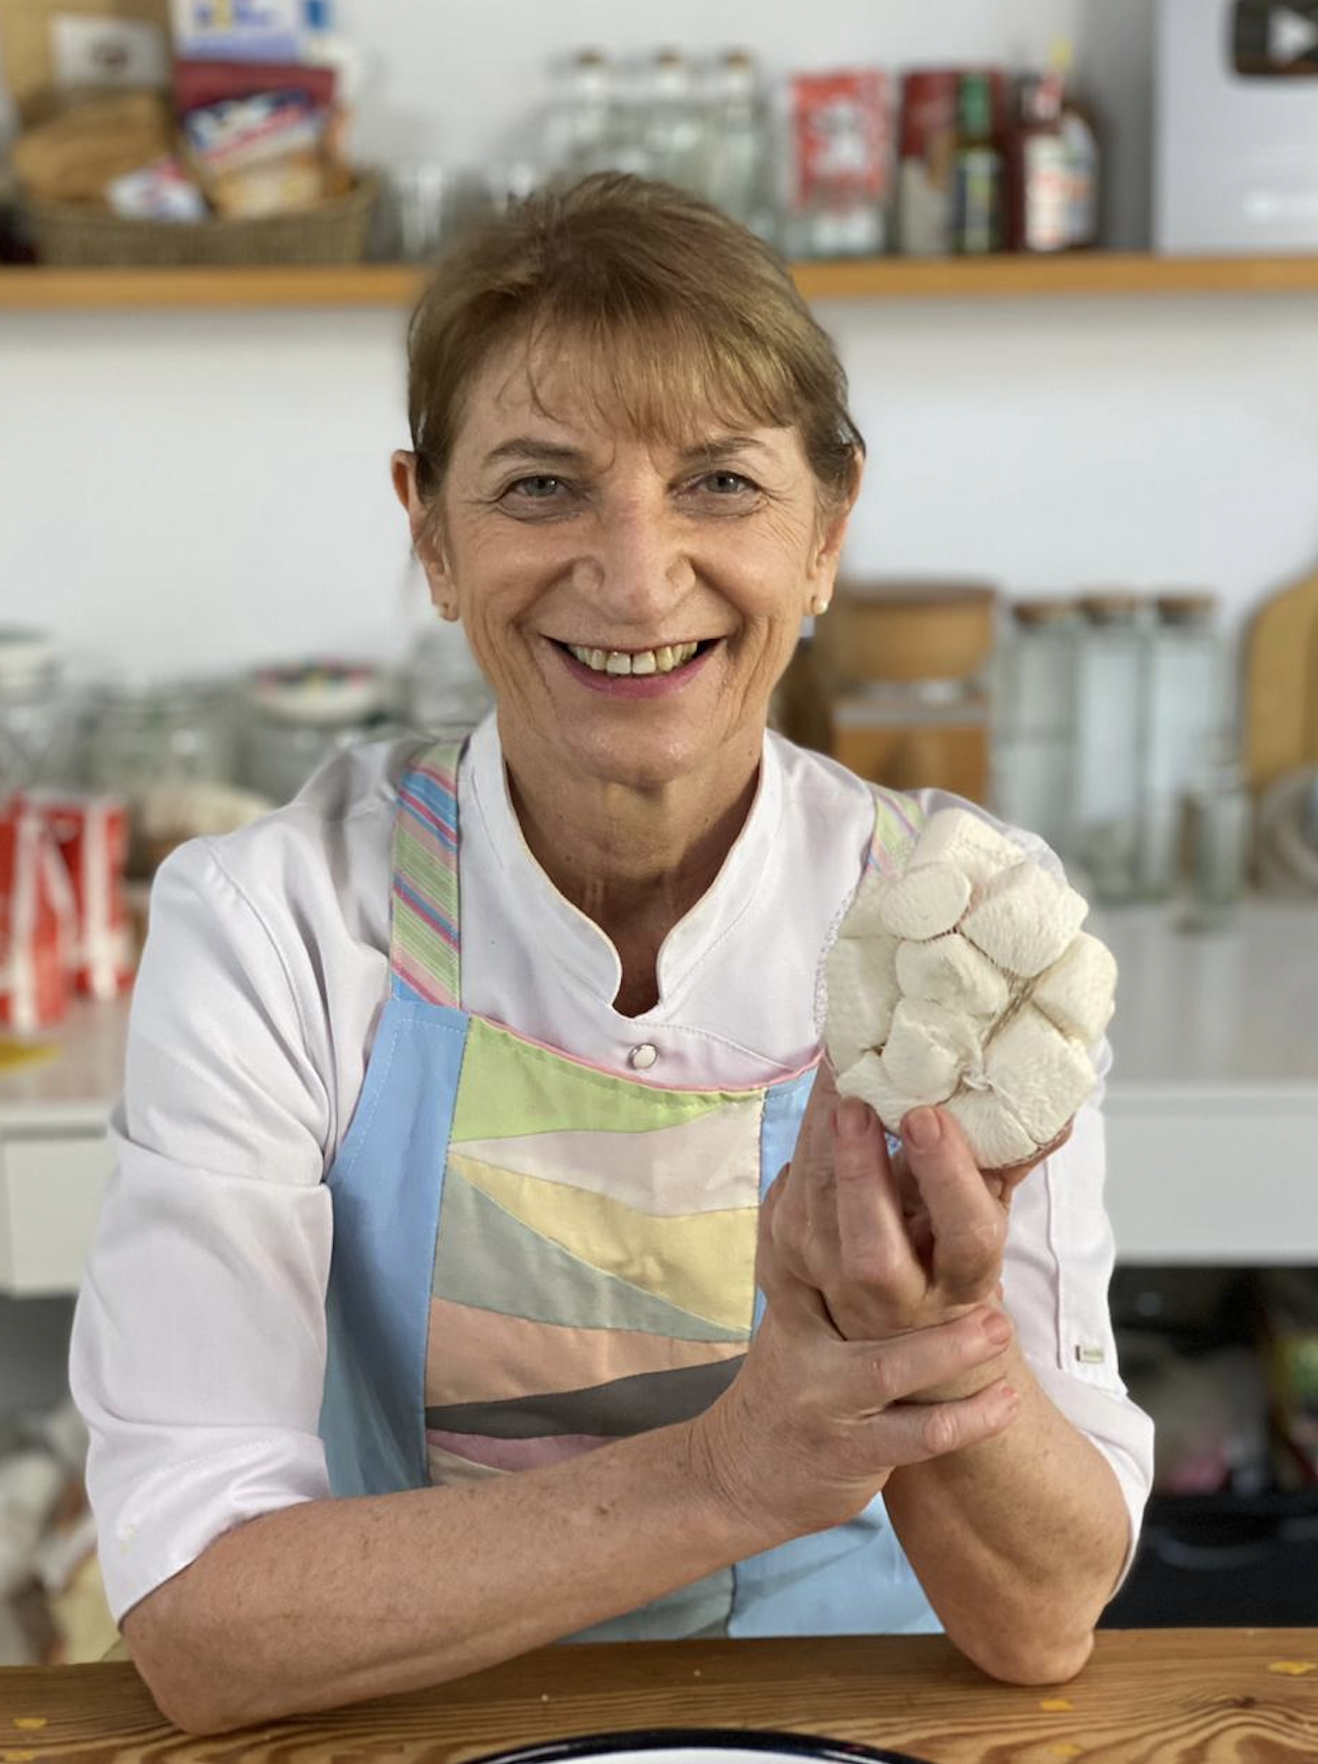 interview with Mariana Koppmann biochemist author sourdough bread scientist based in buenos aires argentina south america follow her on instagram 7